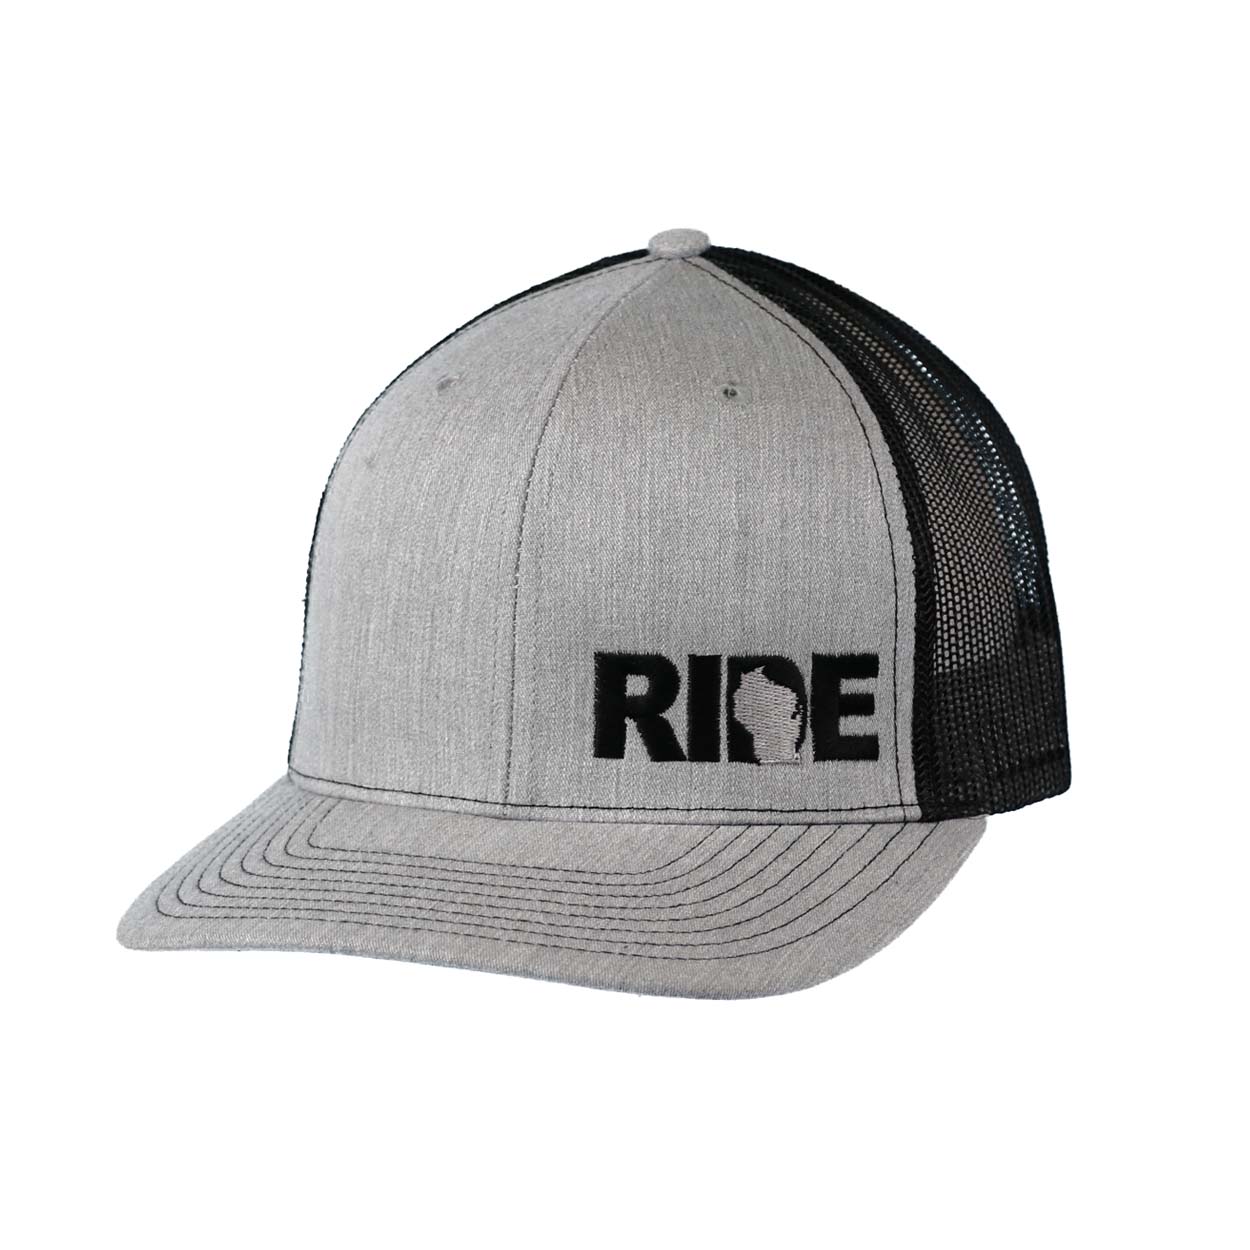 Ride Wisconsin Night Out Embroidered Snapback Trucker Hat Heather Gray/Black